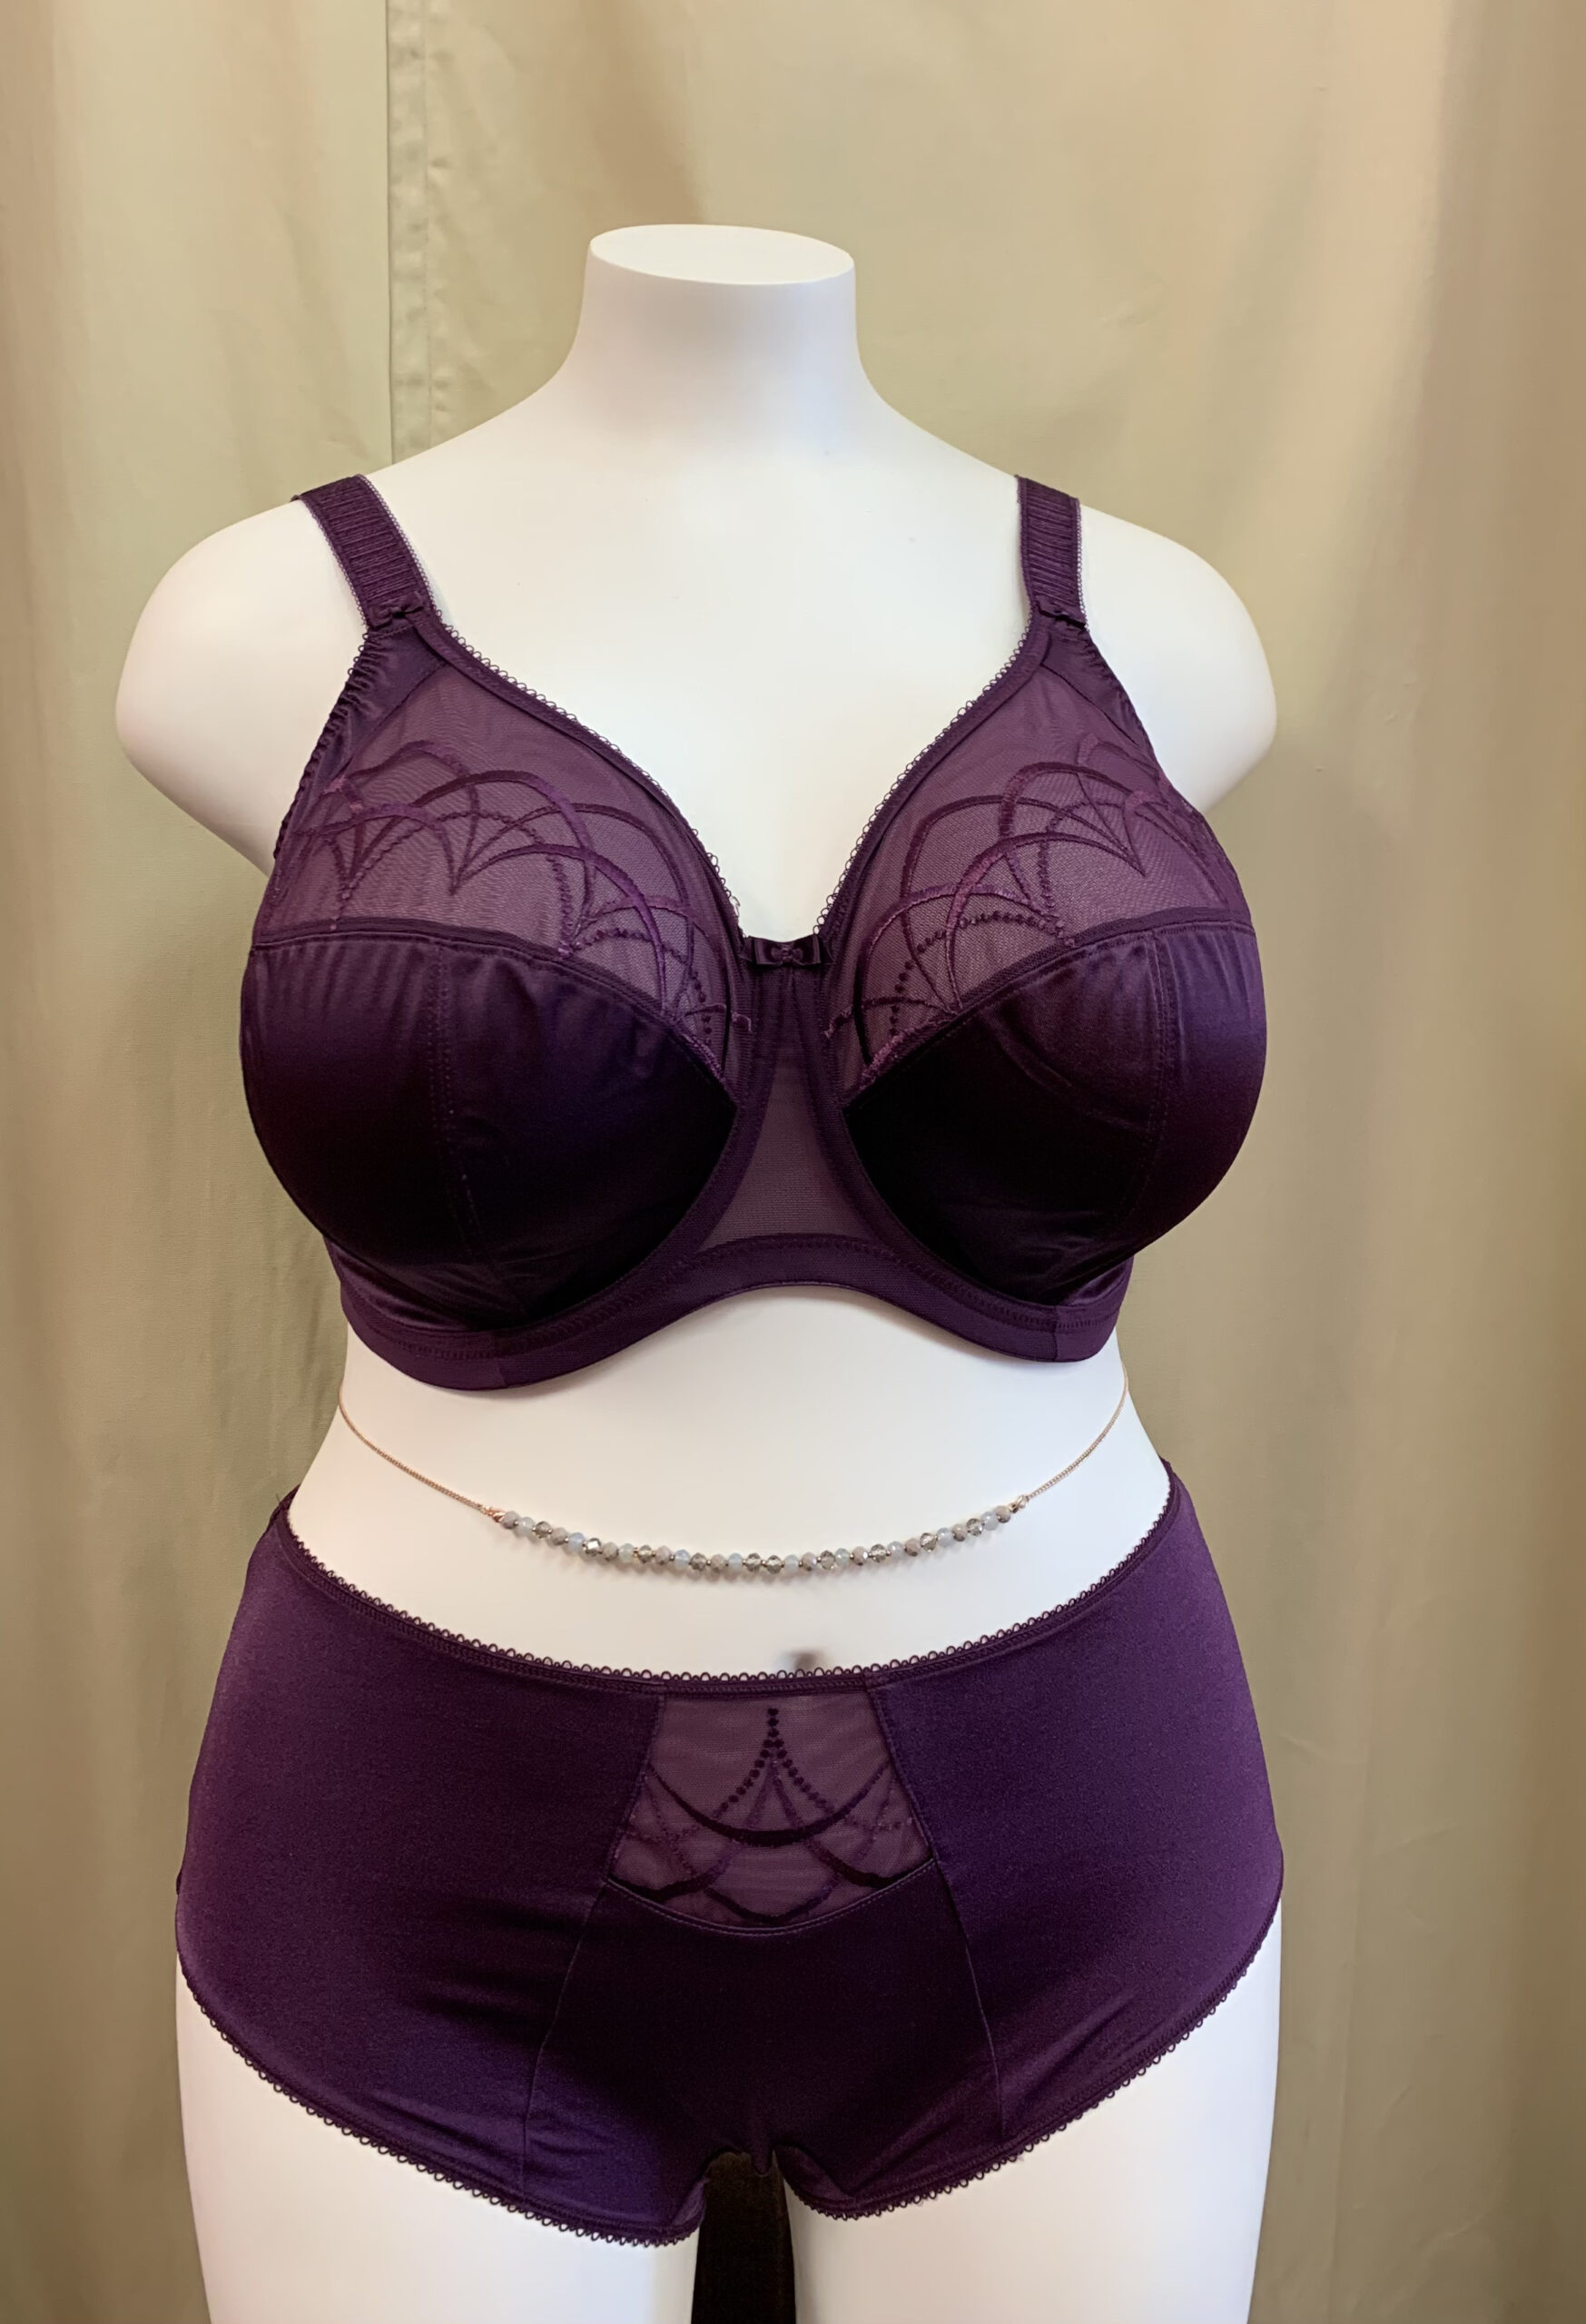 Come see our new Cate bra in plum. We have matching panties as well! We are  open Tuesday-Saturday 10-5.